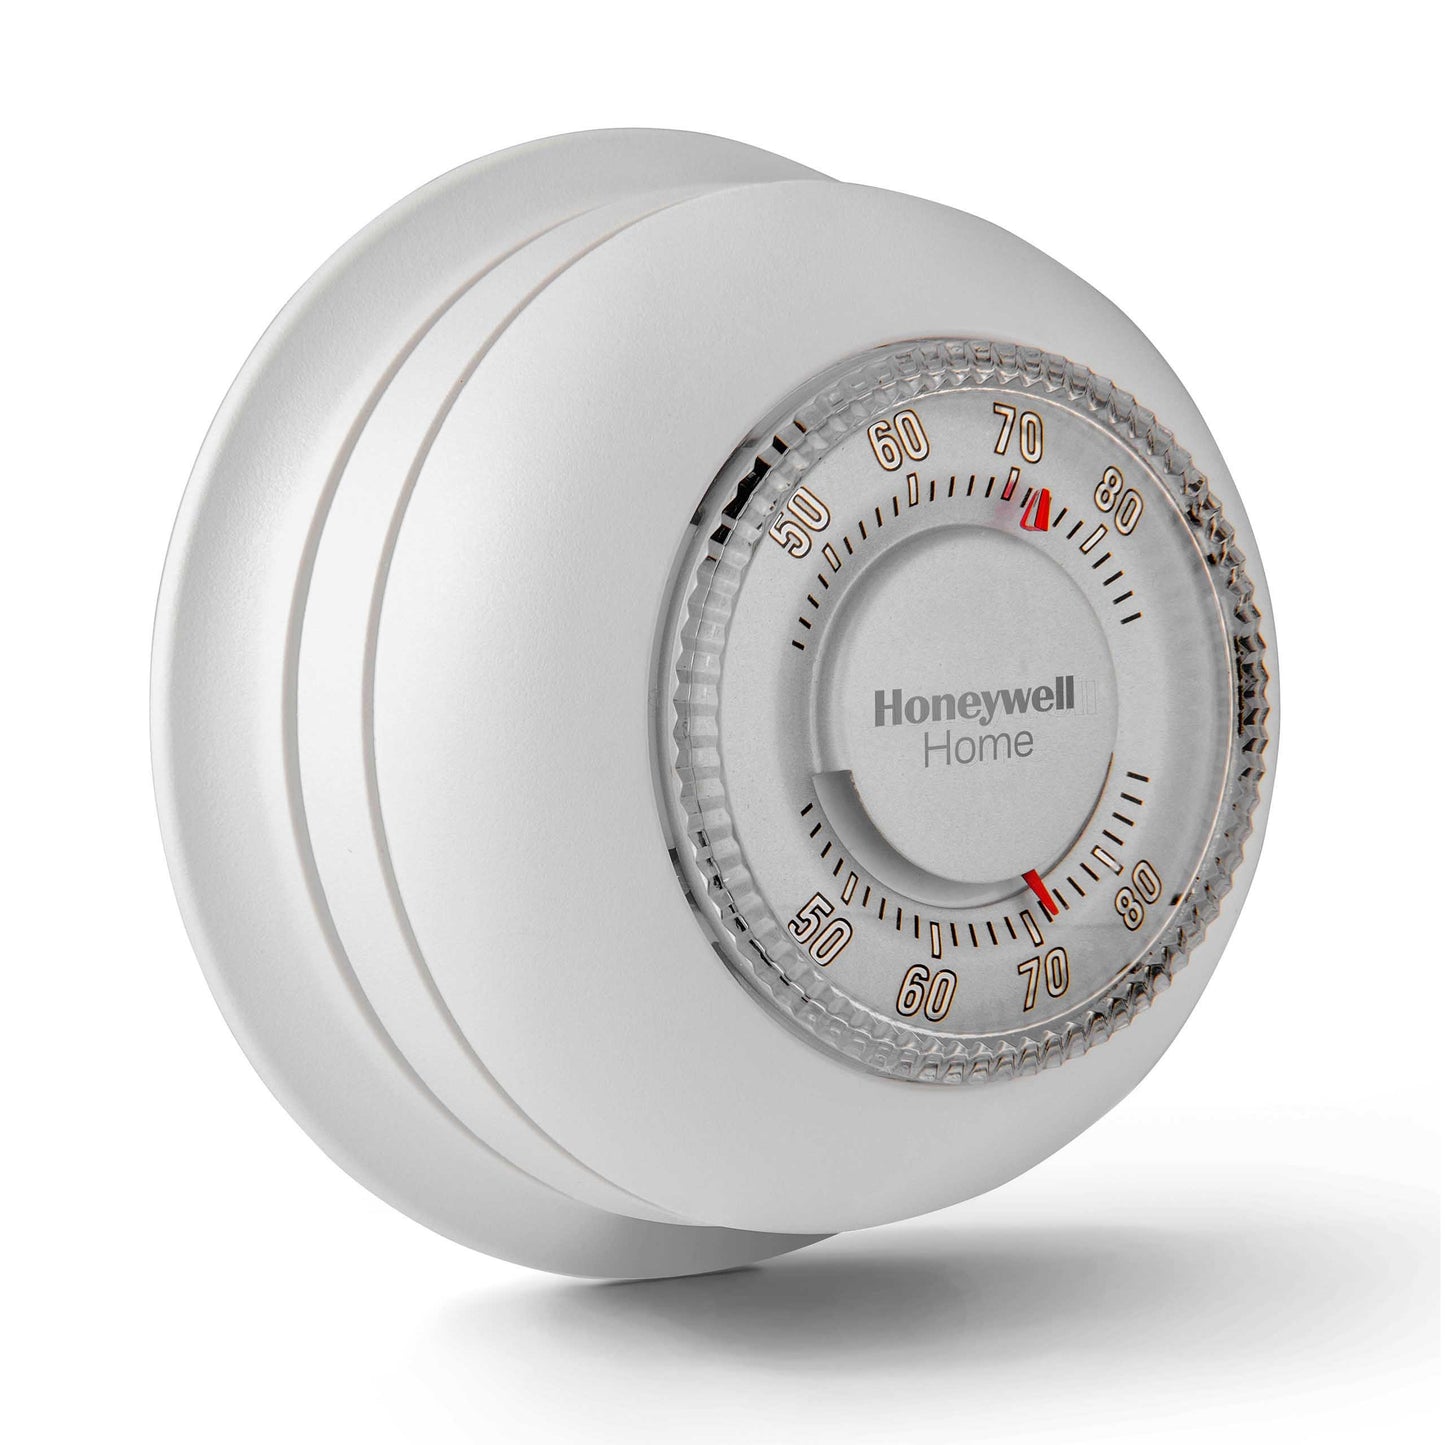 Honeywell T87K1007 - The Round Manual Thermostat with Fahrenheit Plate